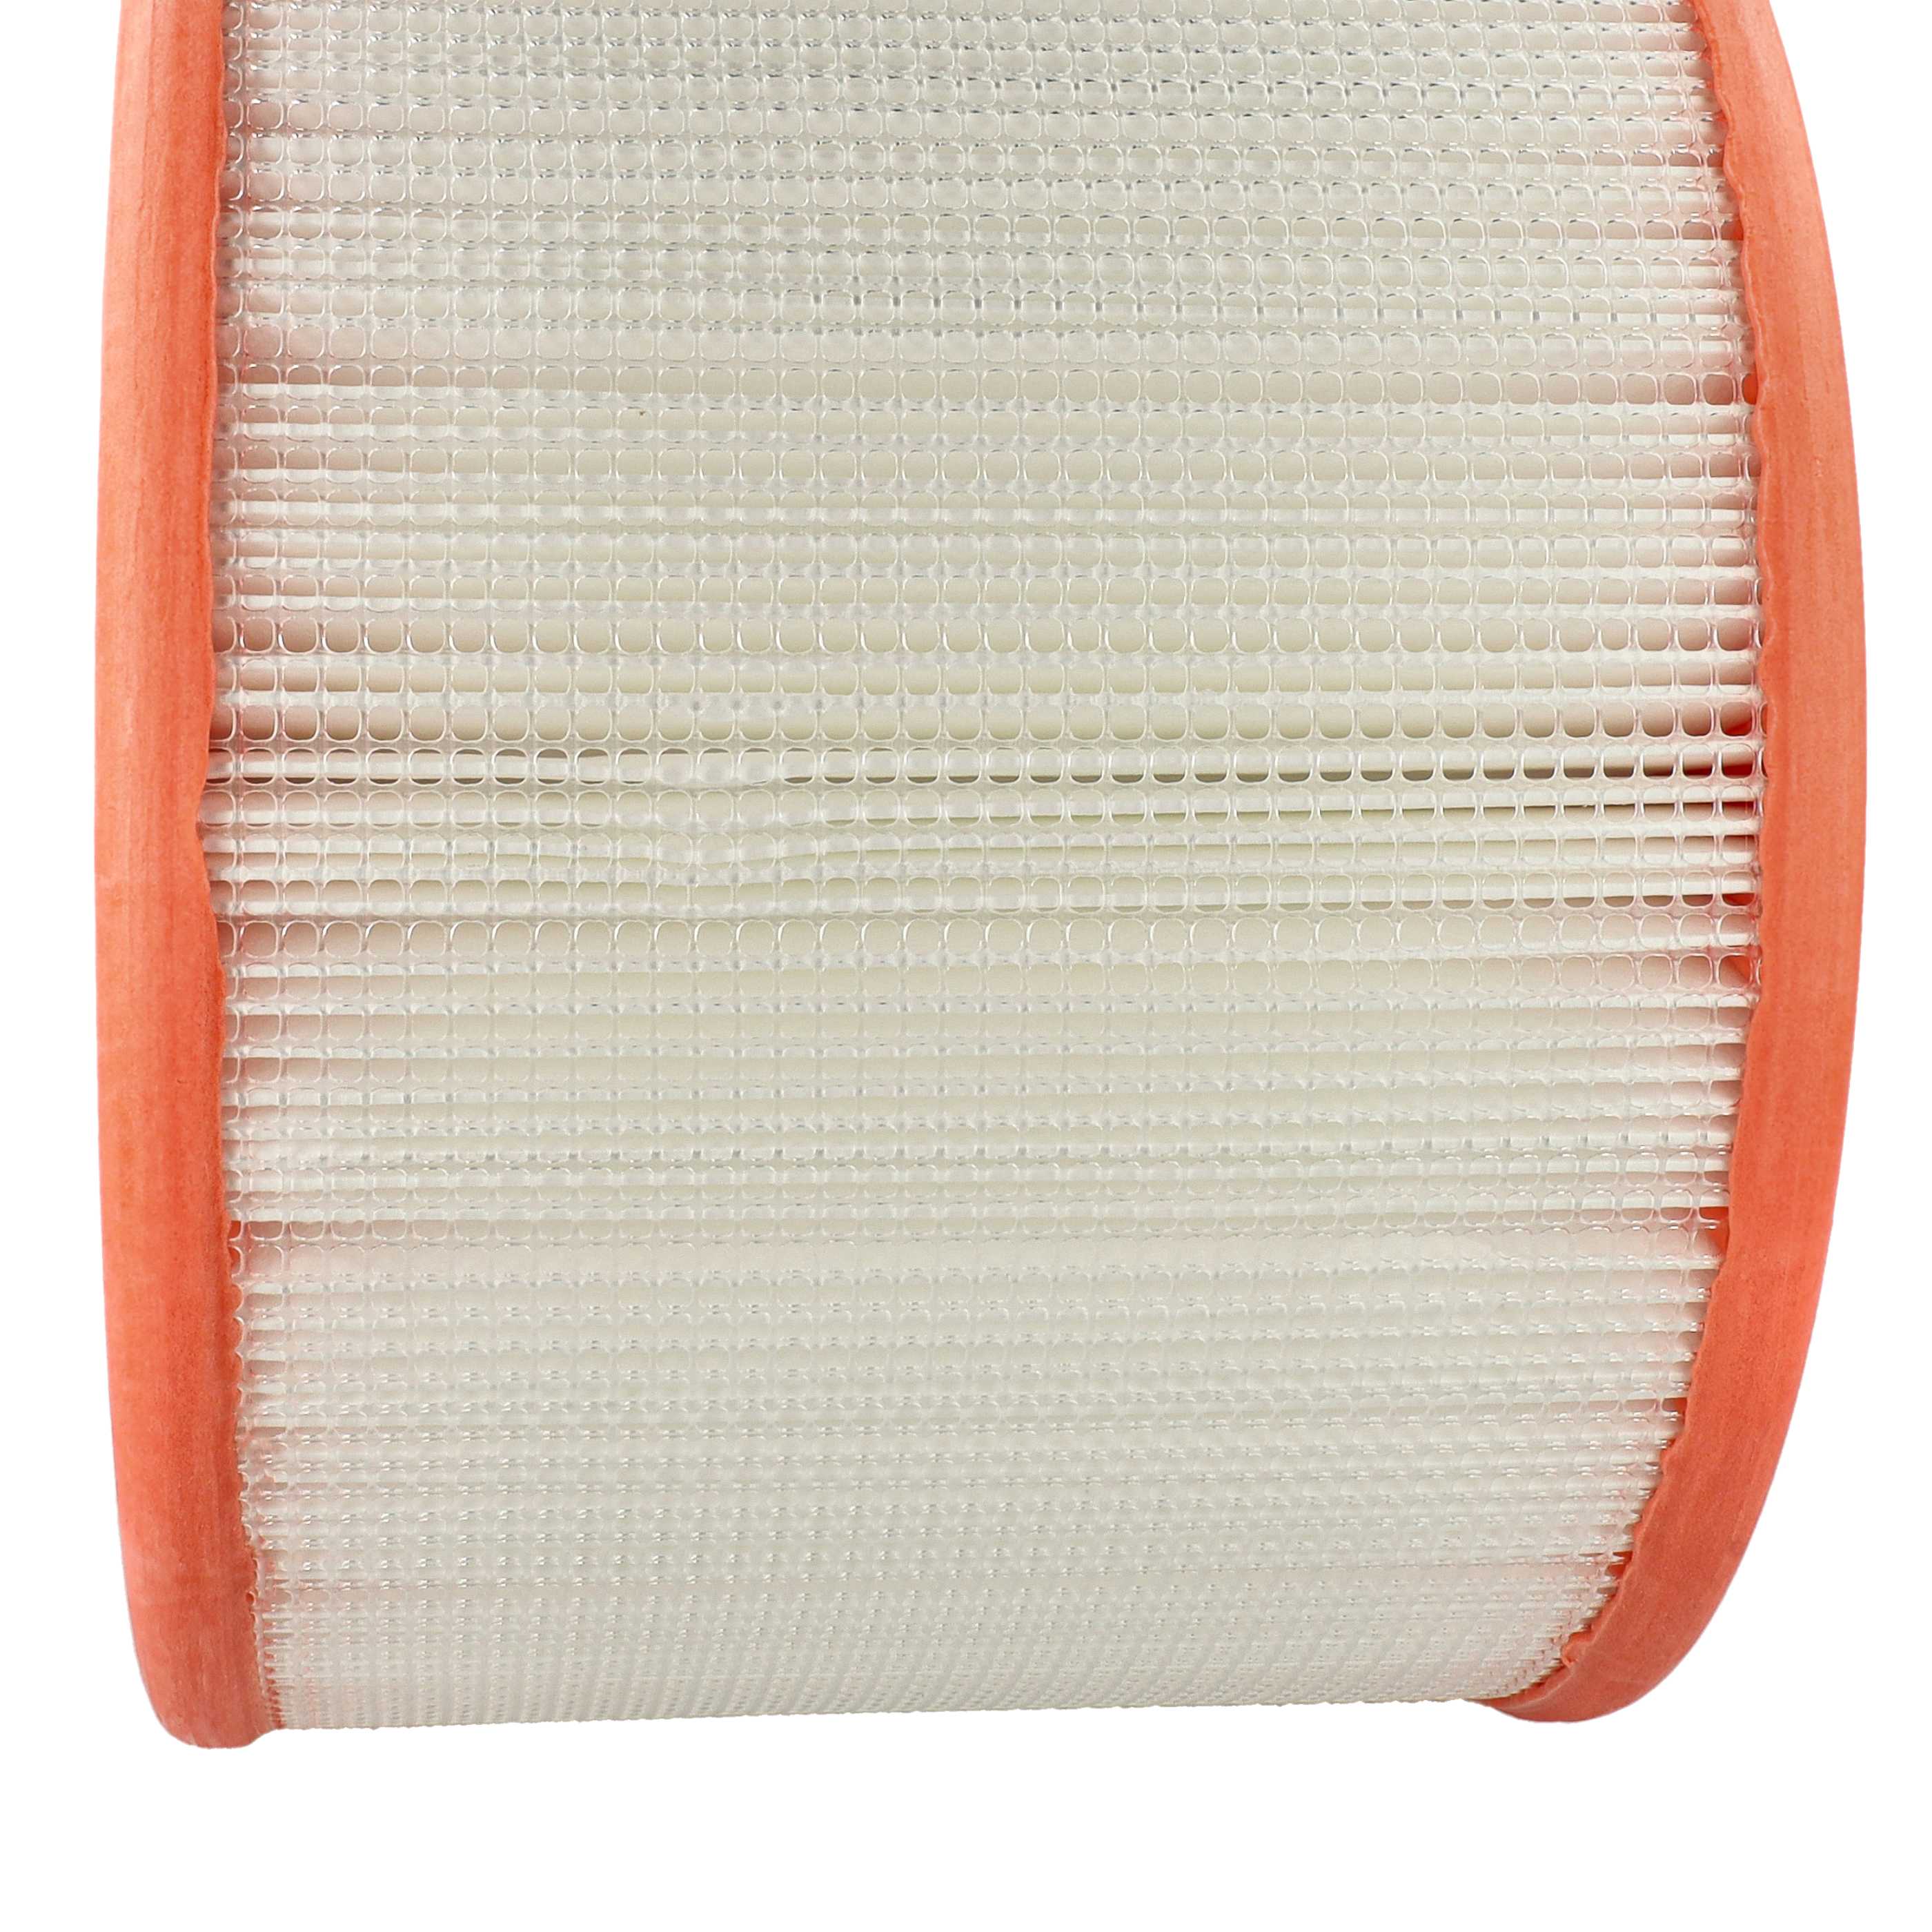 vhbw HEPA Filter Replacement for Honeywell HEP-5018E for Air Cleaner - Spare Air Filter